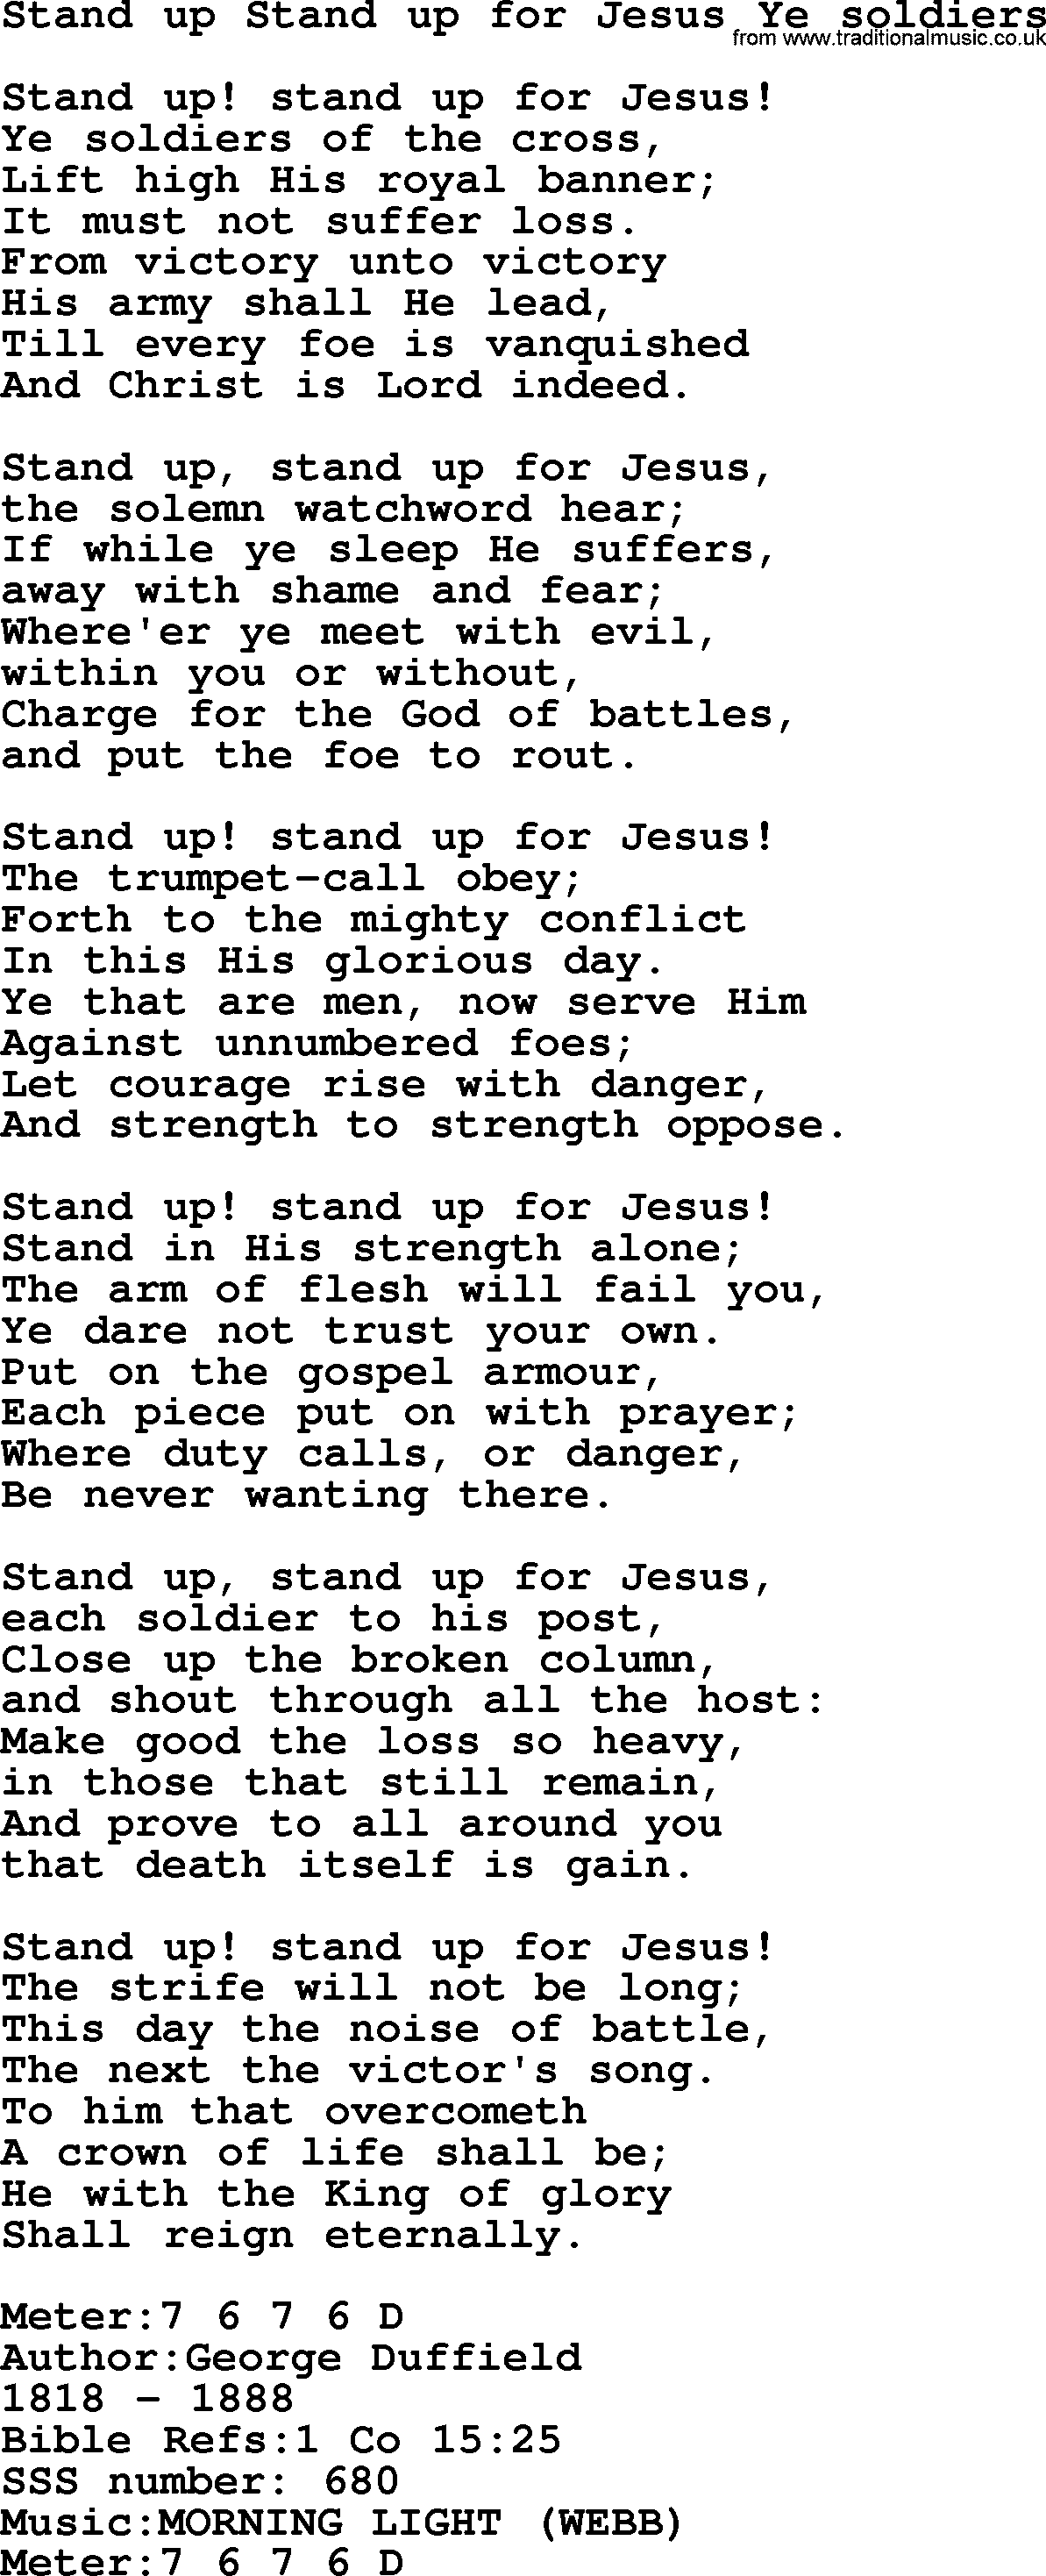 Sacred Songs and Solos complete, 1200 Hymns, title: Stand Up Stand Up For Jesus Ye Soldiers, lyrics and PDF